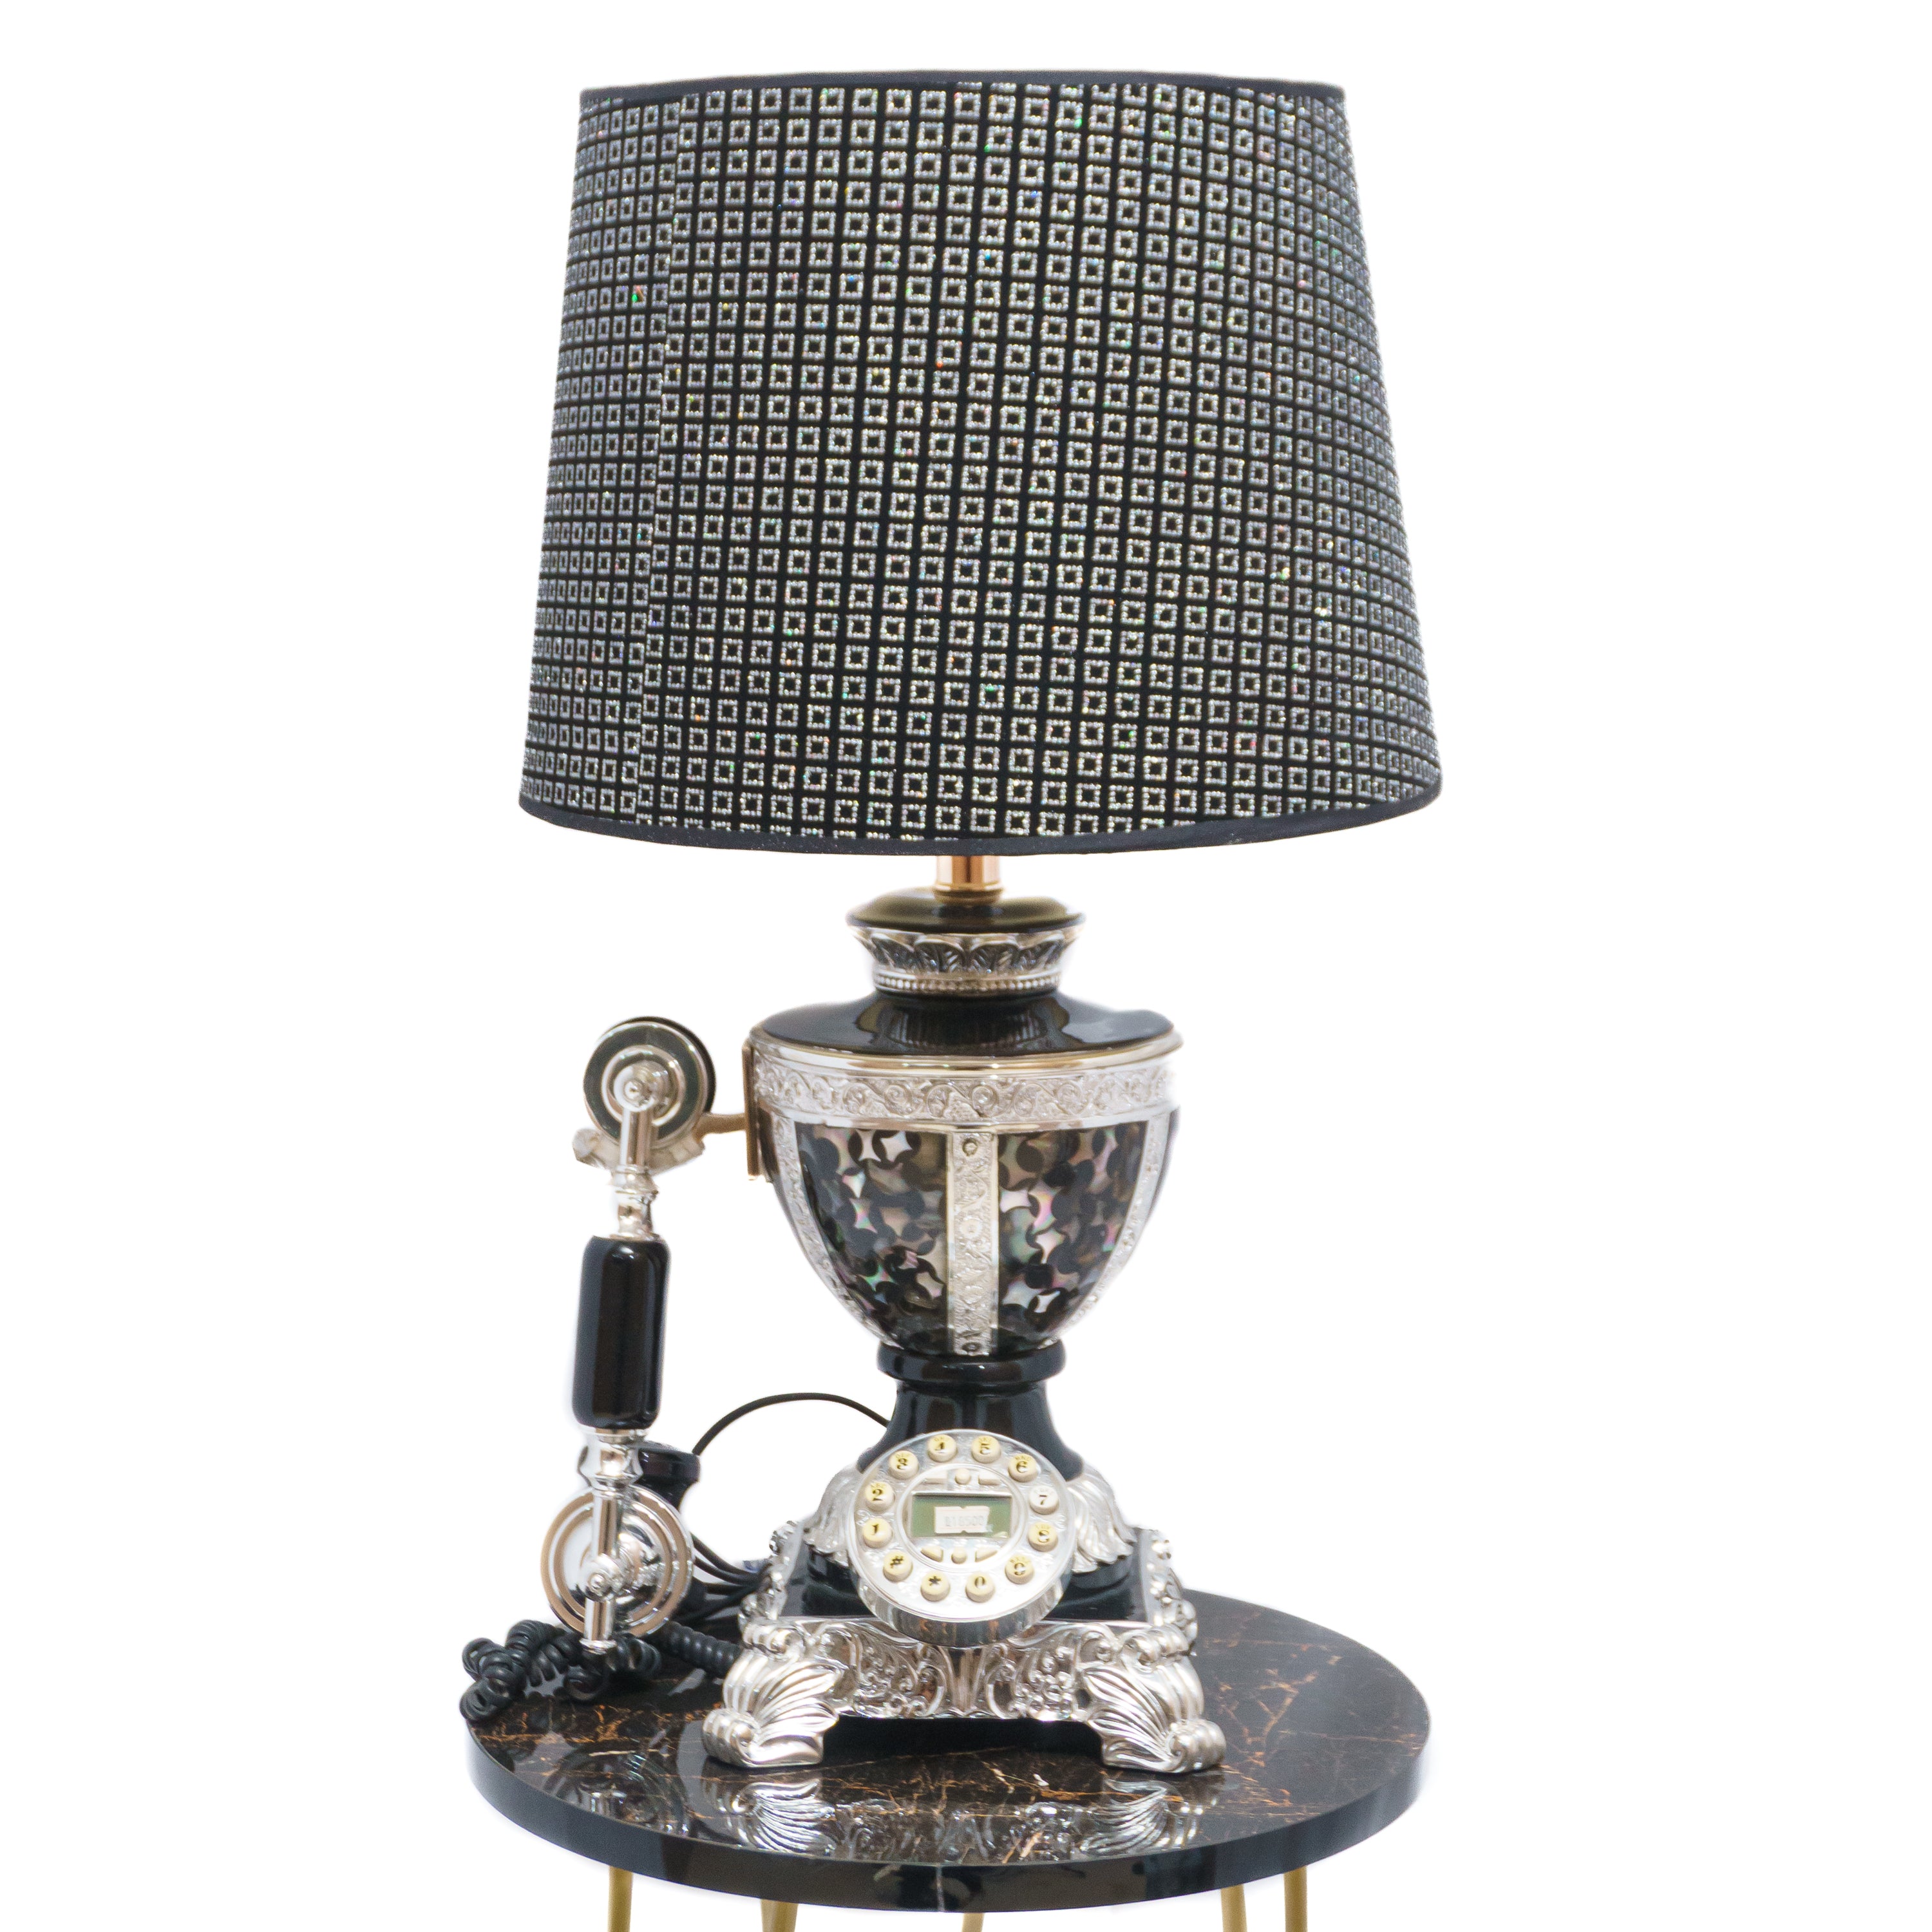 Electric Table Lamp: Square Design Shade with Classic Telephone Set Theme